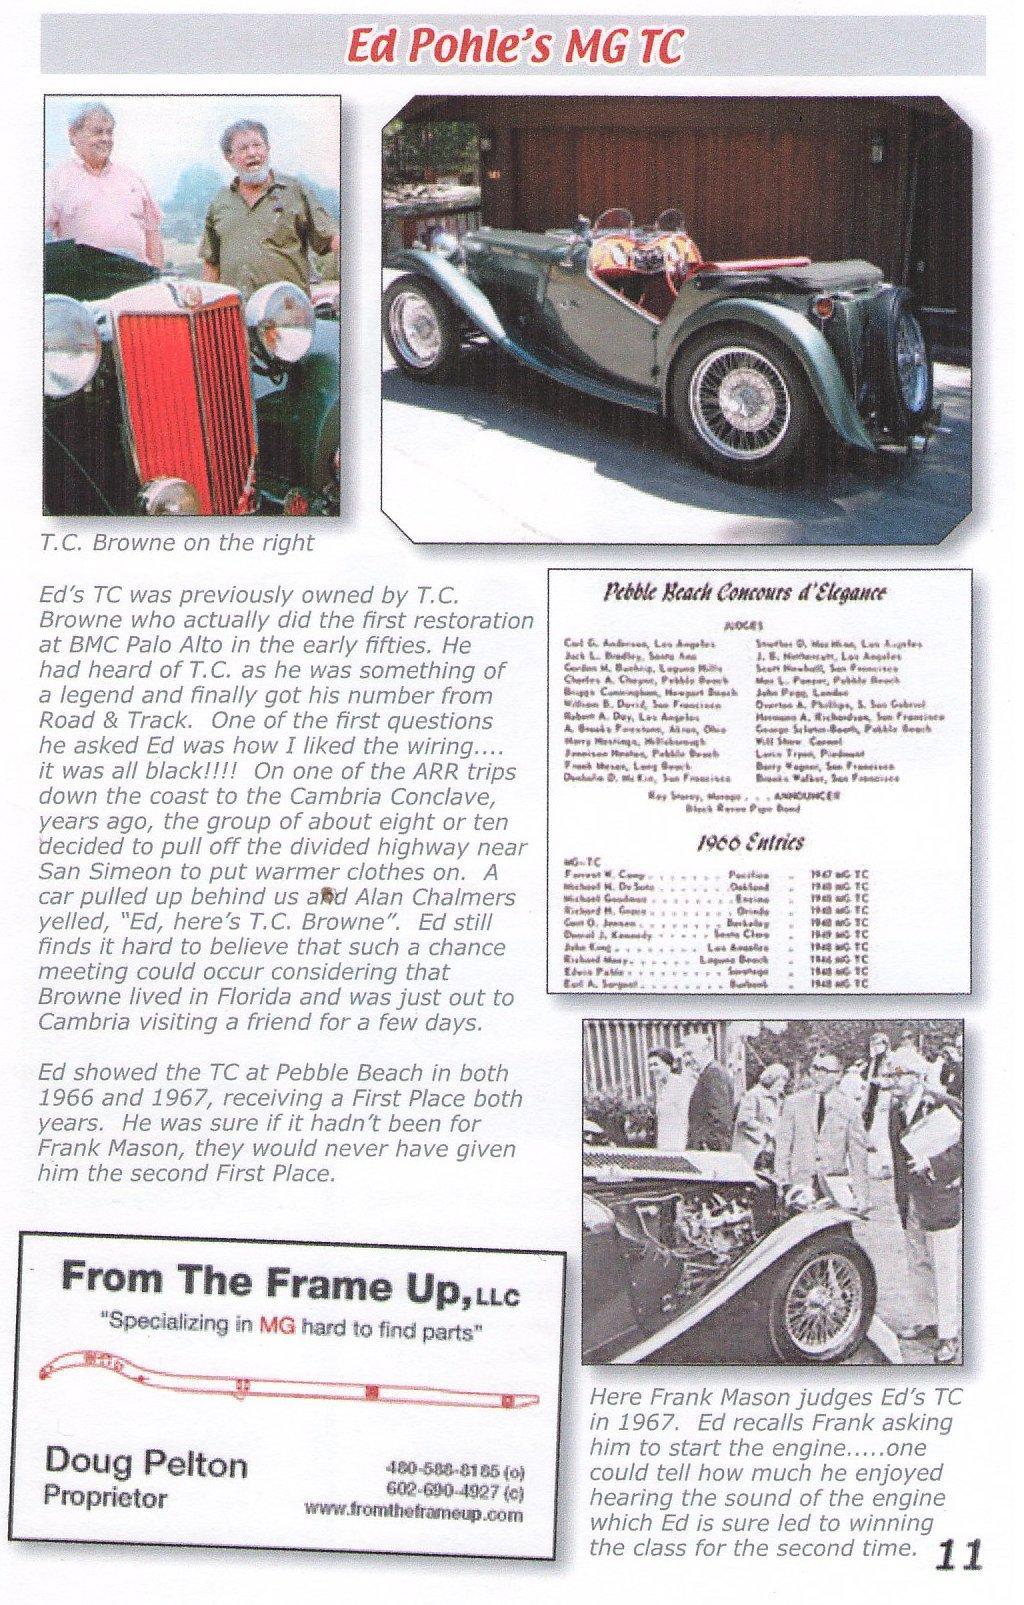 Ed Pohle makes news in the TC Motoring Guild Newsletter You can read all about him and also read a nice write-up on the tenth annual conclave by Dick Miura, who was also a Rough Rider for a while,